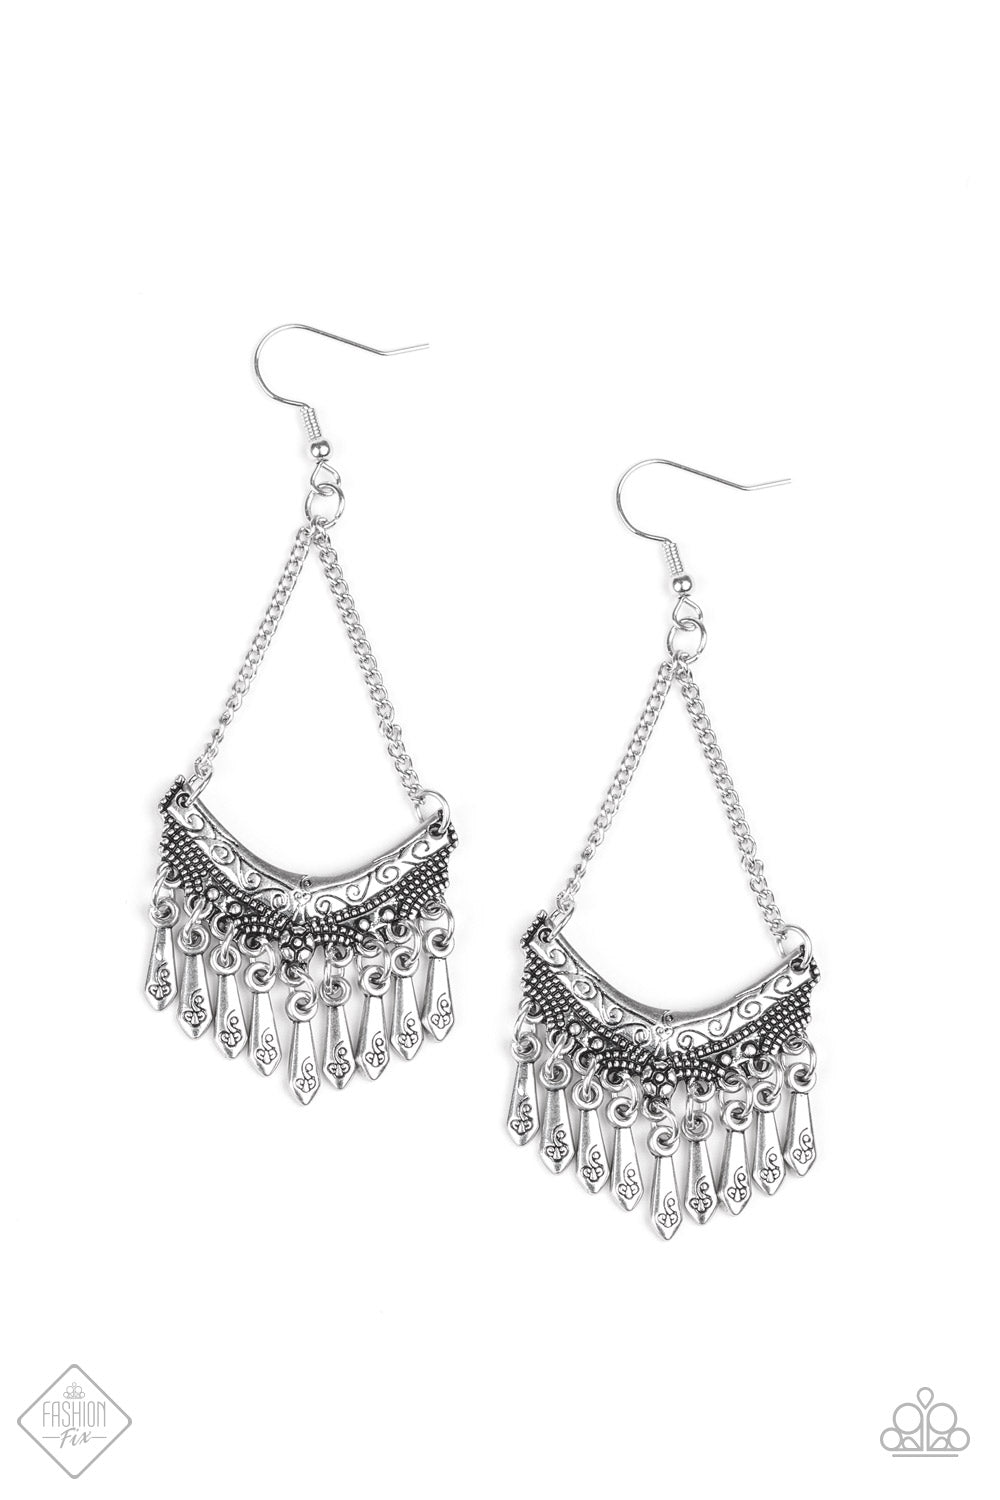 IN ROGUE - SILVER TEXTURED CRESCENT FRINGE FASHION FIX EARRINGS